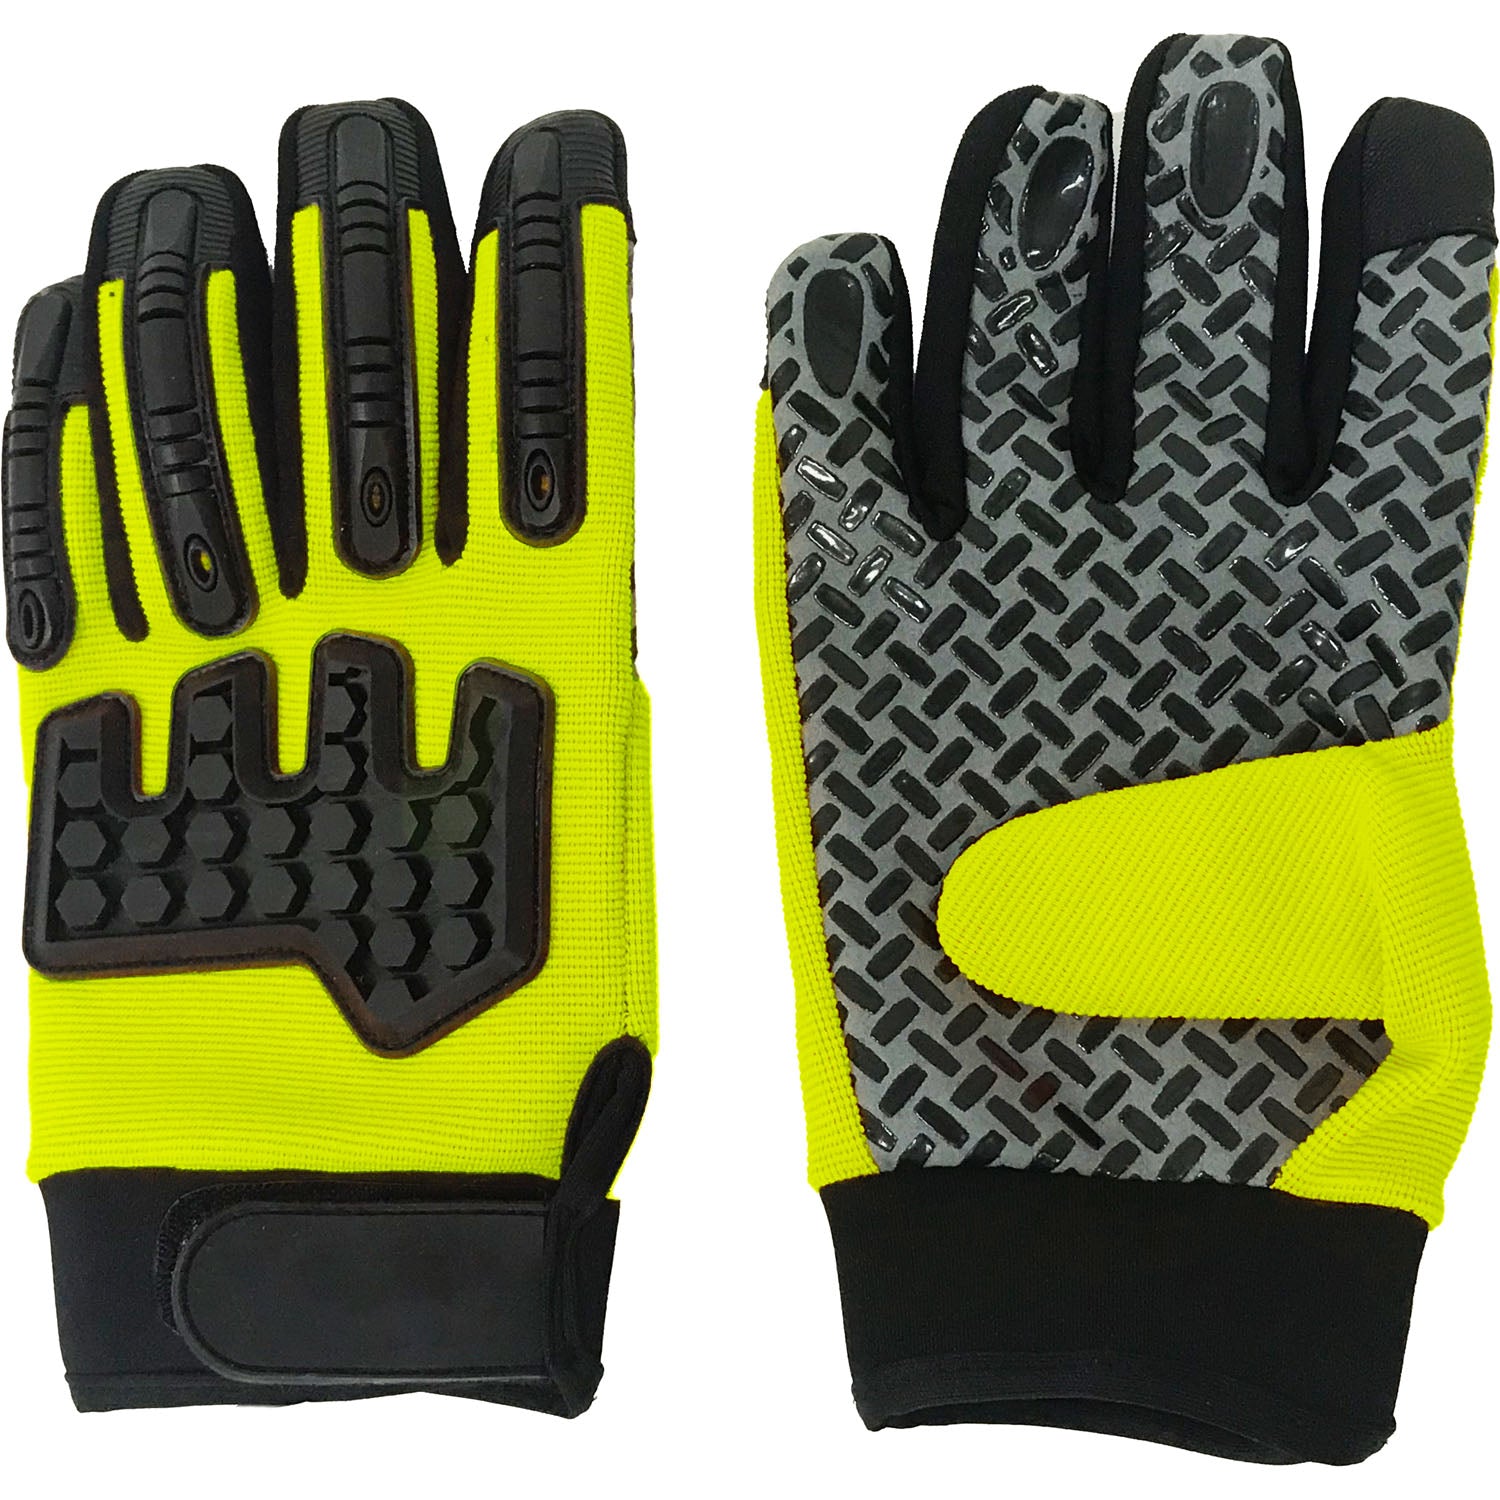 High Visibility Mechanics Gloves Green and Black 1 Pair